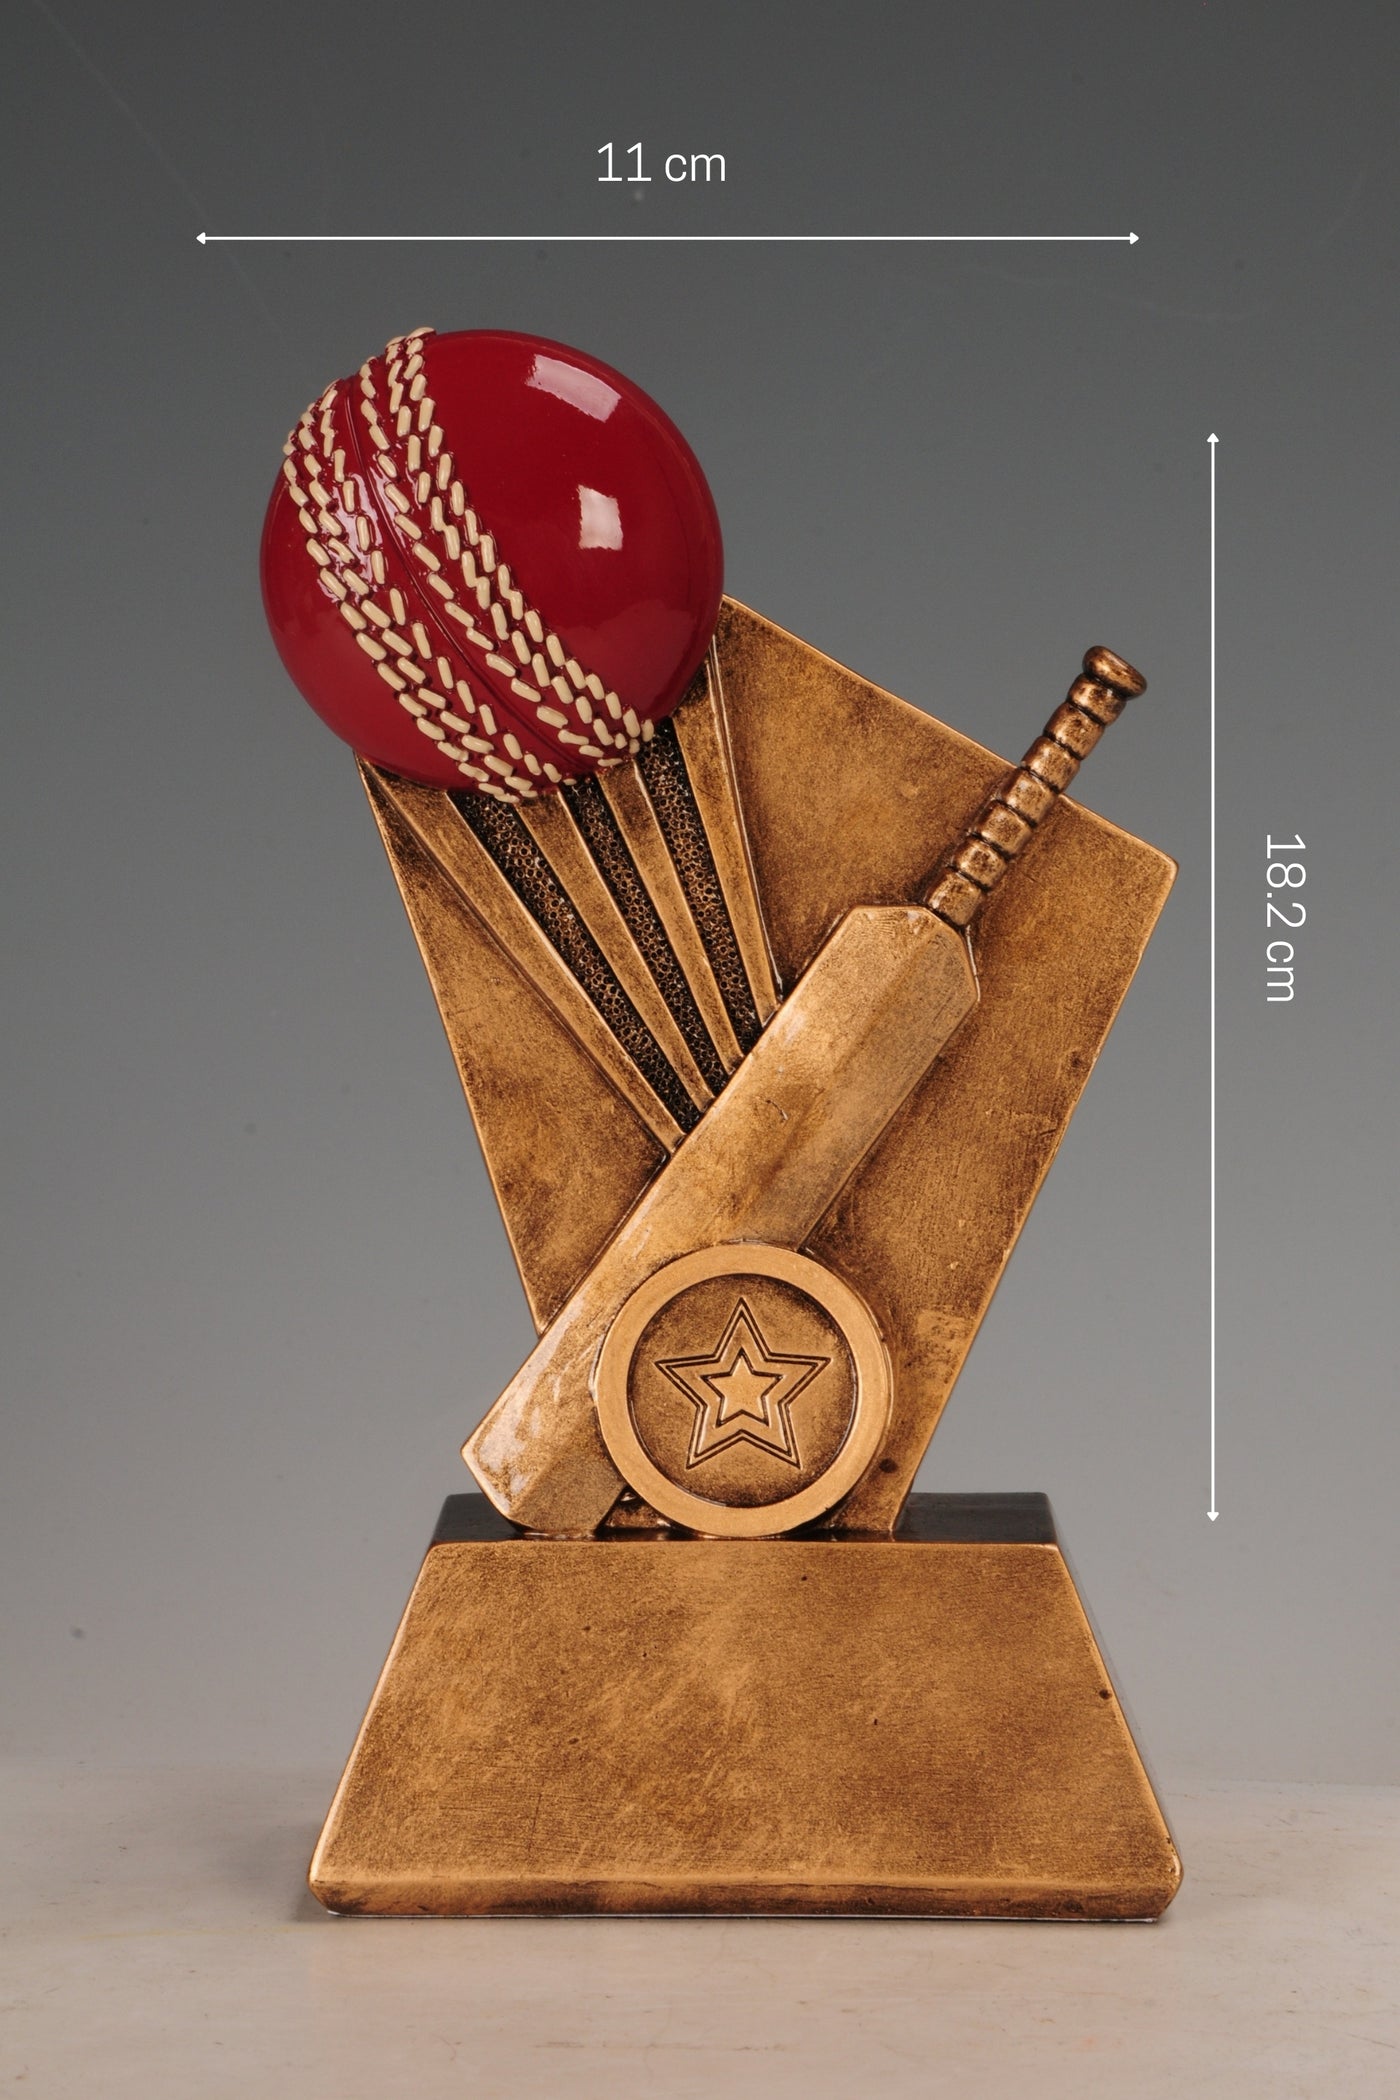 Cricket showpiece for your home or office decor